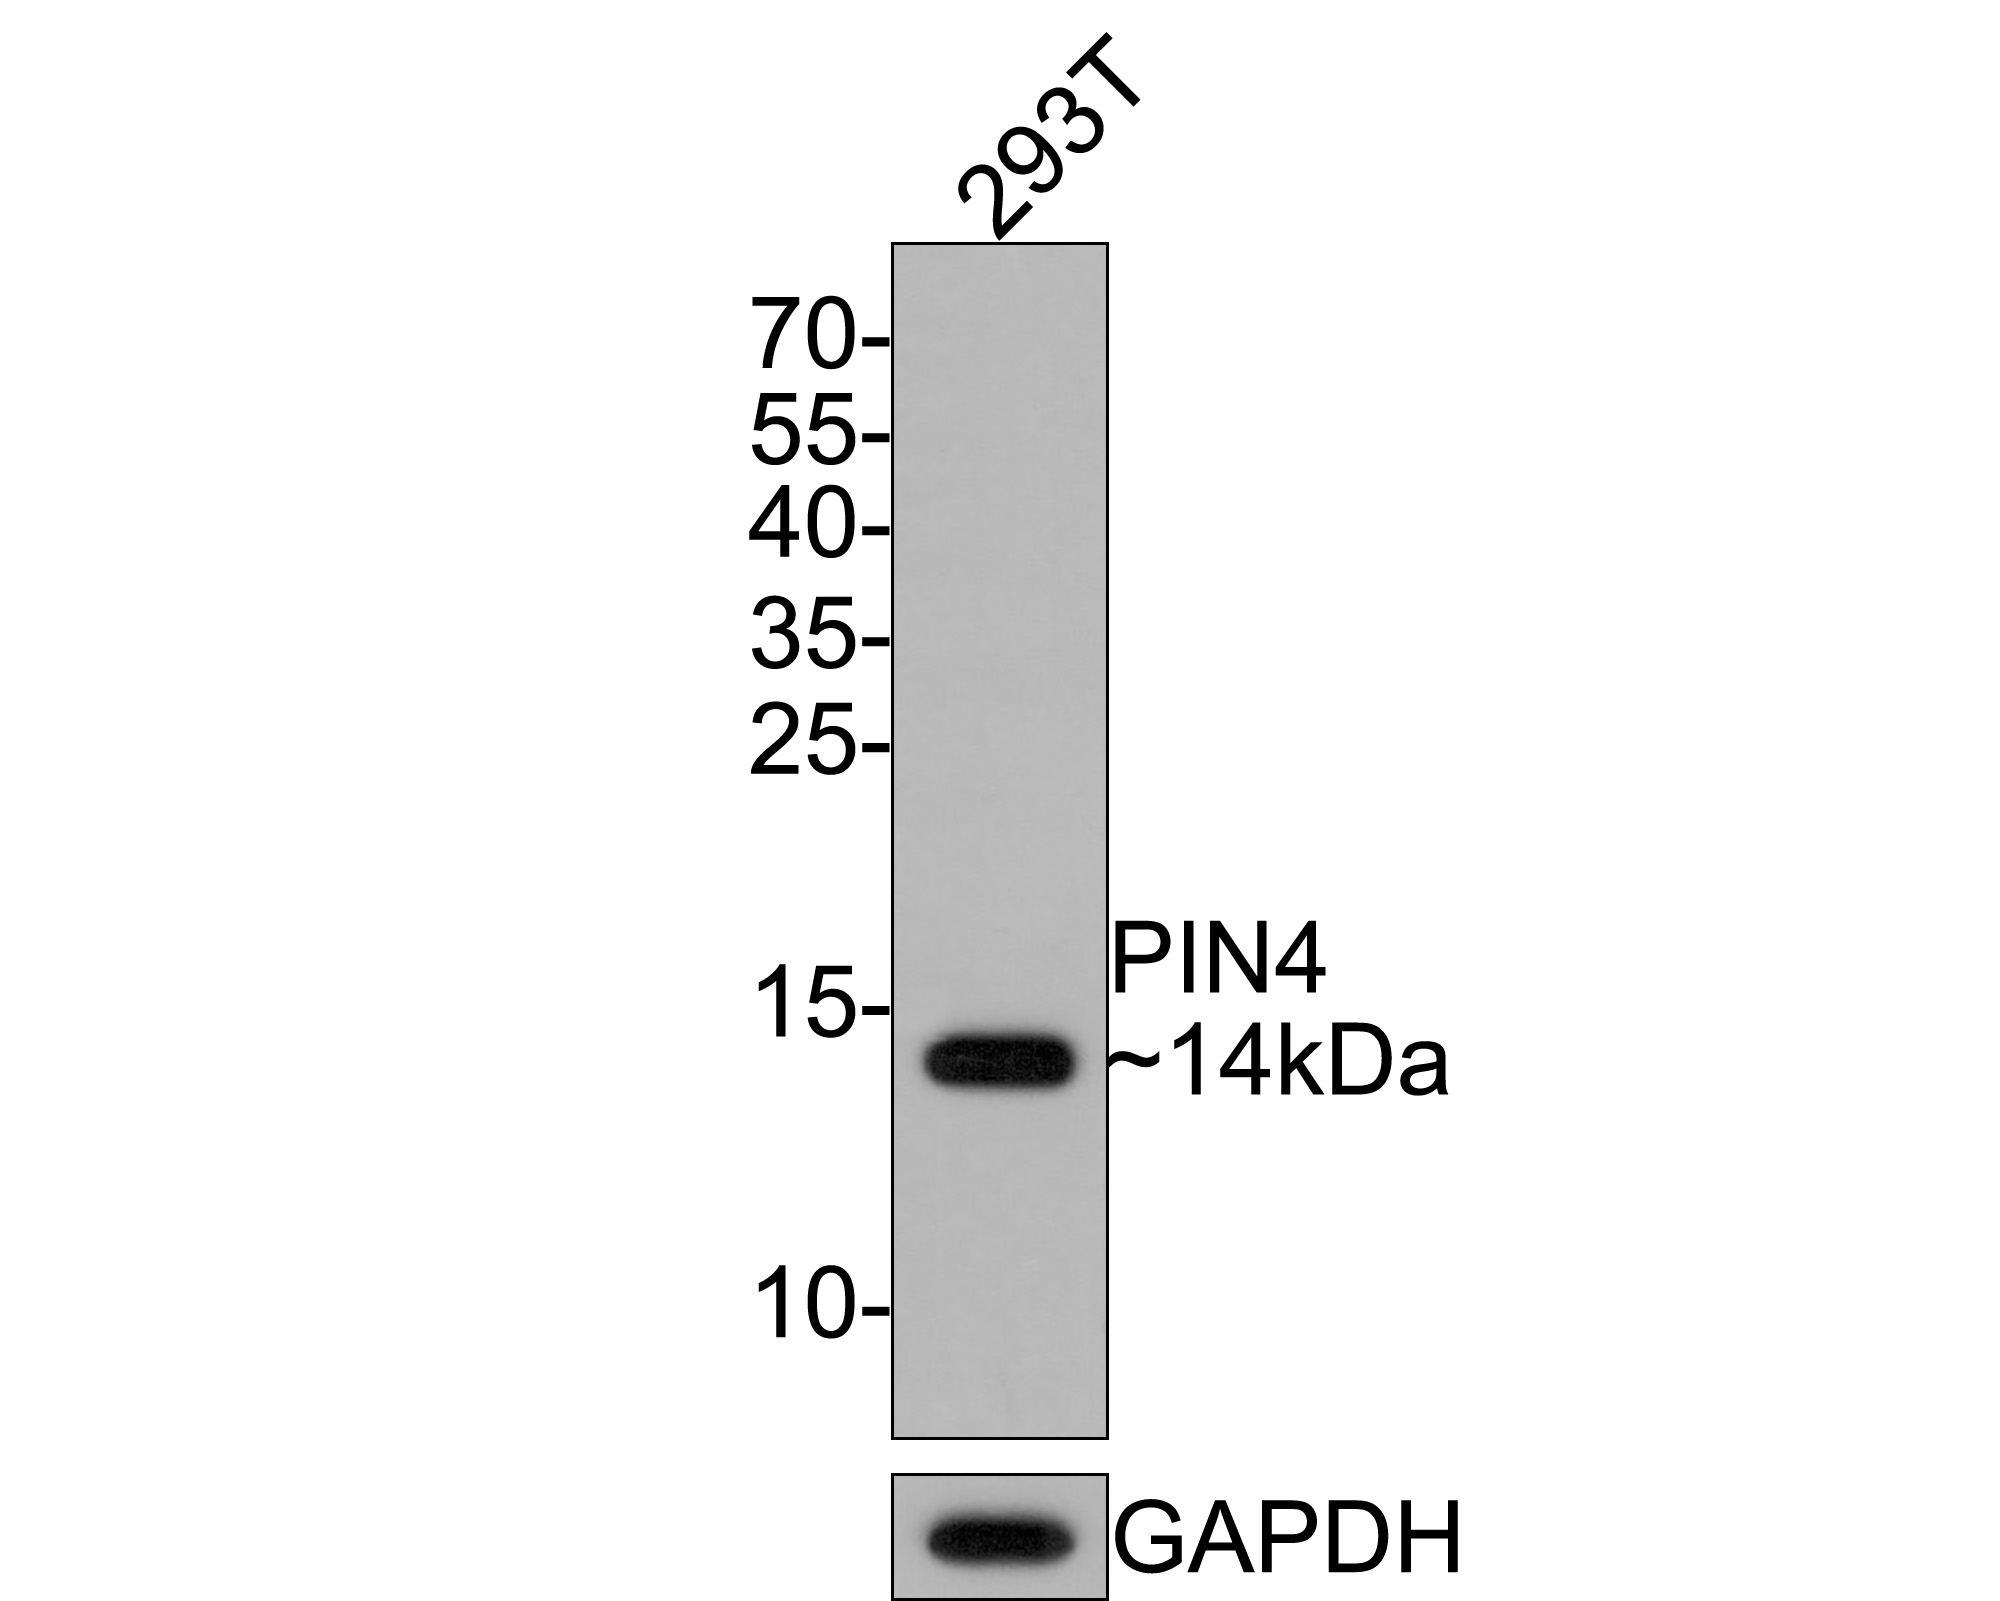 Western blot analysis of PIN4 on 293T cell lysates with Rabbit anti-PIN4 antibody (HA721121) at 1/500 dilution.<br />
<br />
Lysates/proteins at 10 µg/Lane.<br />
<br />
Predicted band size: 14 kDa<br />
Observed band size: 14 kDa<br />
<br />
Exposure time: 2 minutes;<br />
<br />
15% SDS-PAGE gel.<br />
<br />
Proteins were transferred to a PVDF membrane and blocked with 5% NFDM/TBST for 1 hour at room temperature. The primary antibody (HA721121) at 1/500 dilution was used in 5% NFDM/TBST at room temperature for 2 hours. Goat Anti-Rabbit IgG - HRP Secondary Antibody (HA1001) at 1:300,000 dilution was used for 1 hour at room temperature.